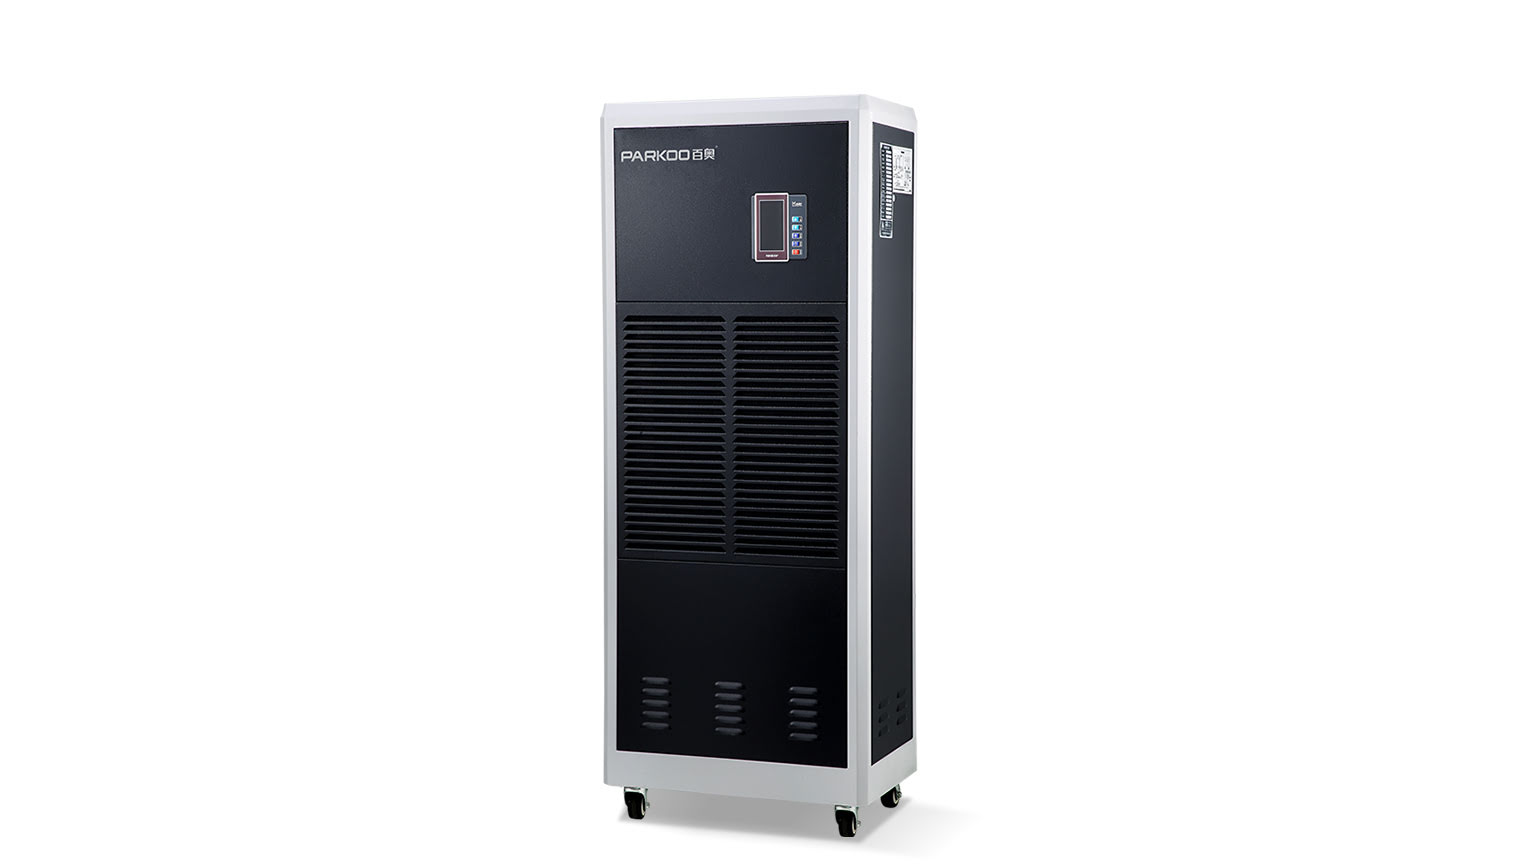 The Difference in Dehumidification Performance Between Dehumidifiers and Air Conditioners Revealed! It turns out that the difference is so big